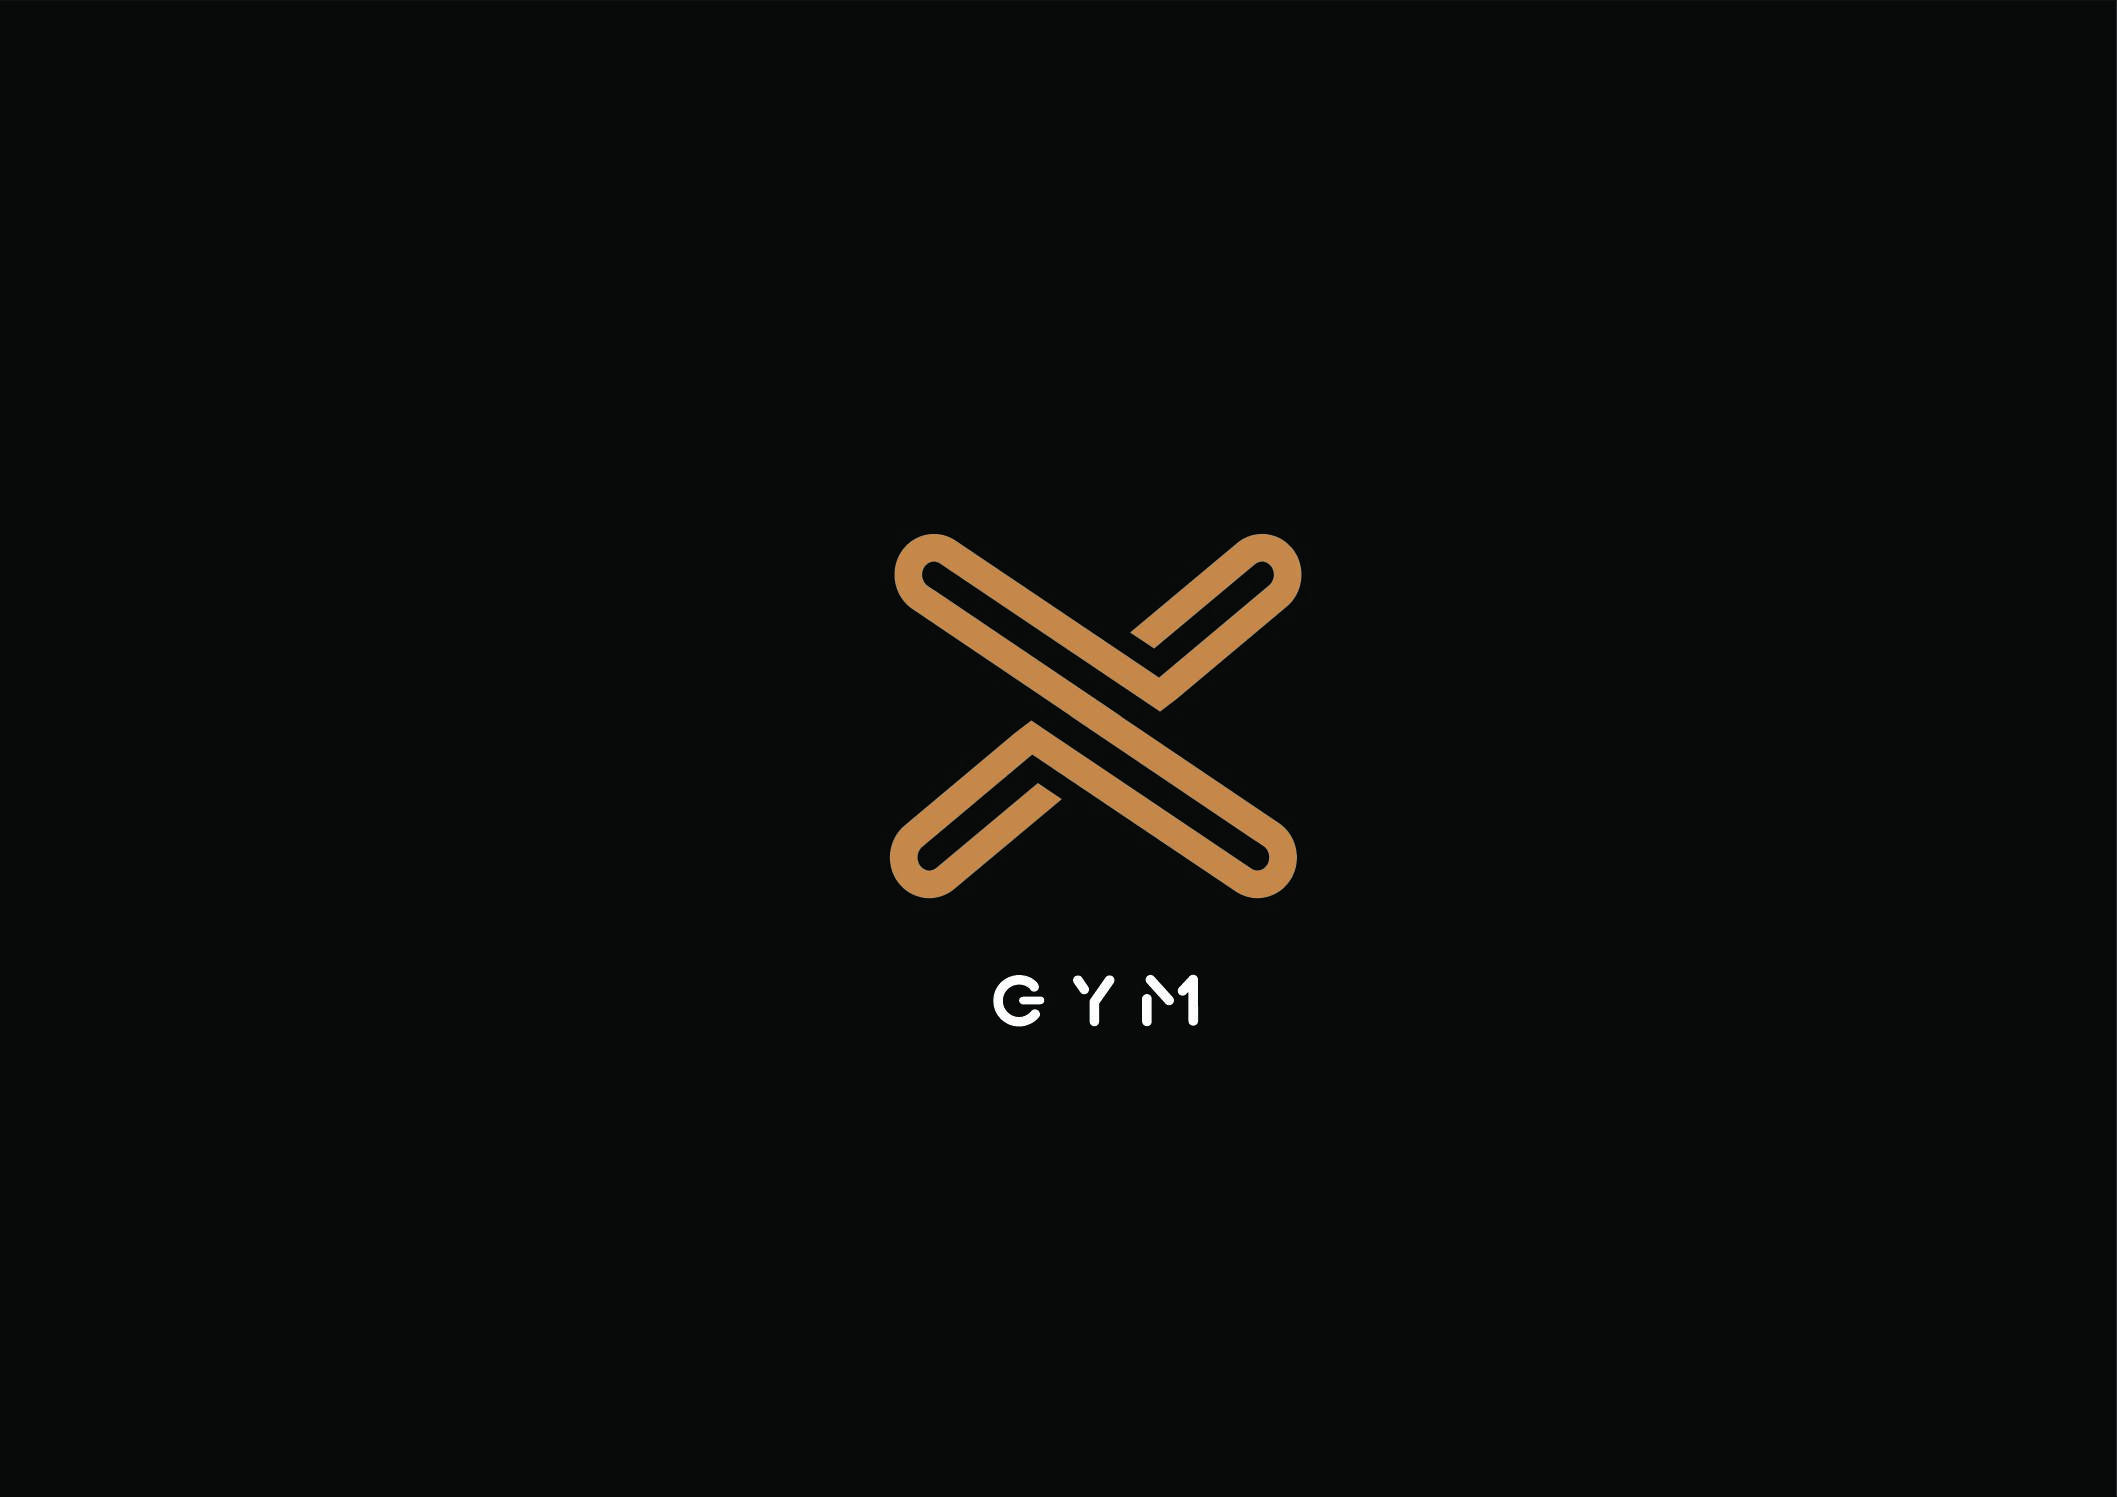 X-Gym-Final-Logos-Centred-With-Gold